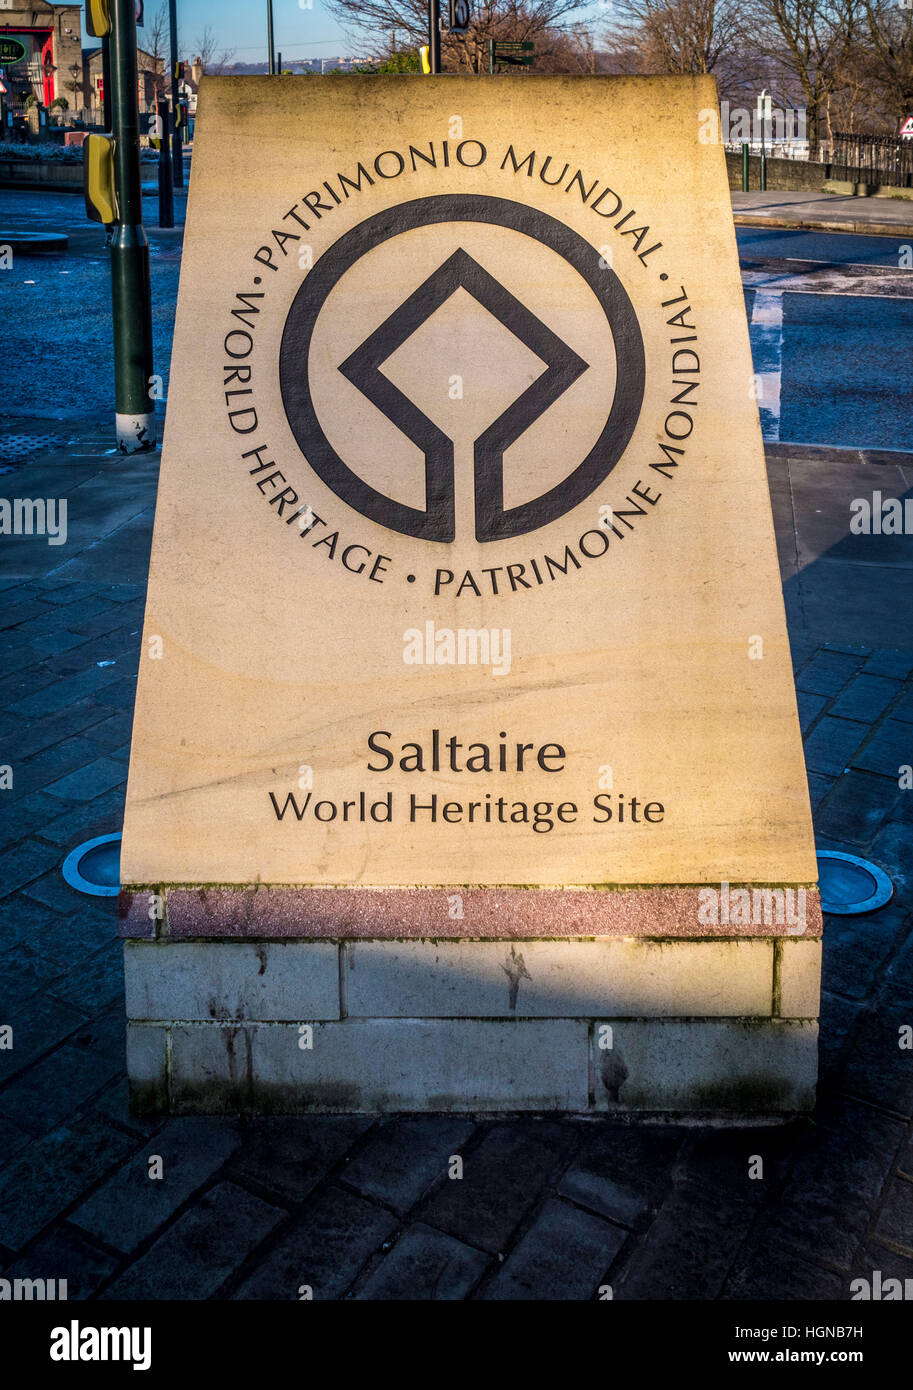 World Heritage Site sign, Saltaire, West Yorkshire, UK Stock Photo